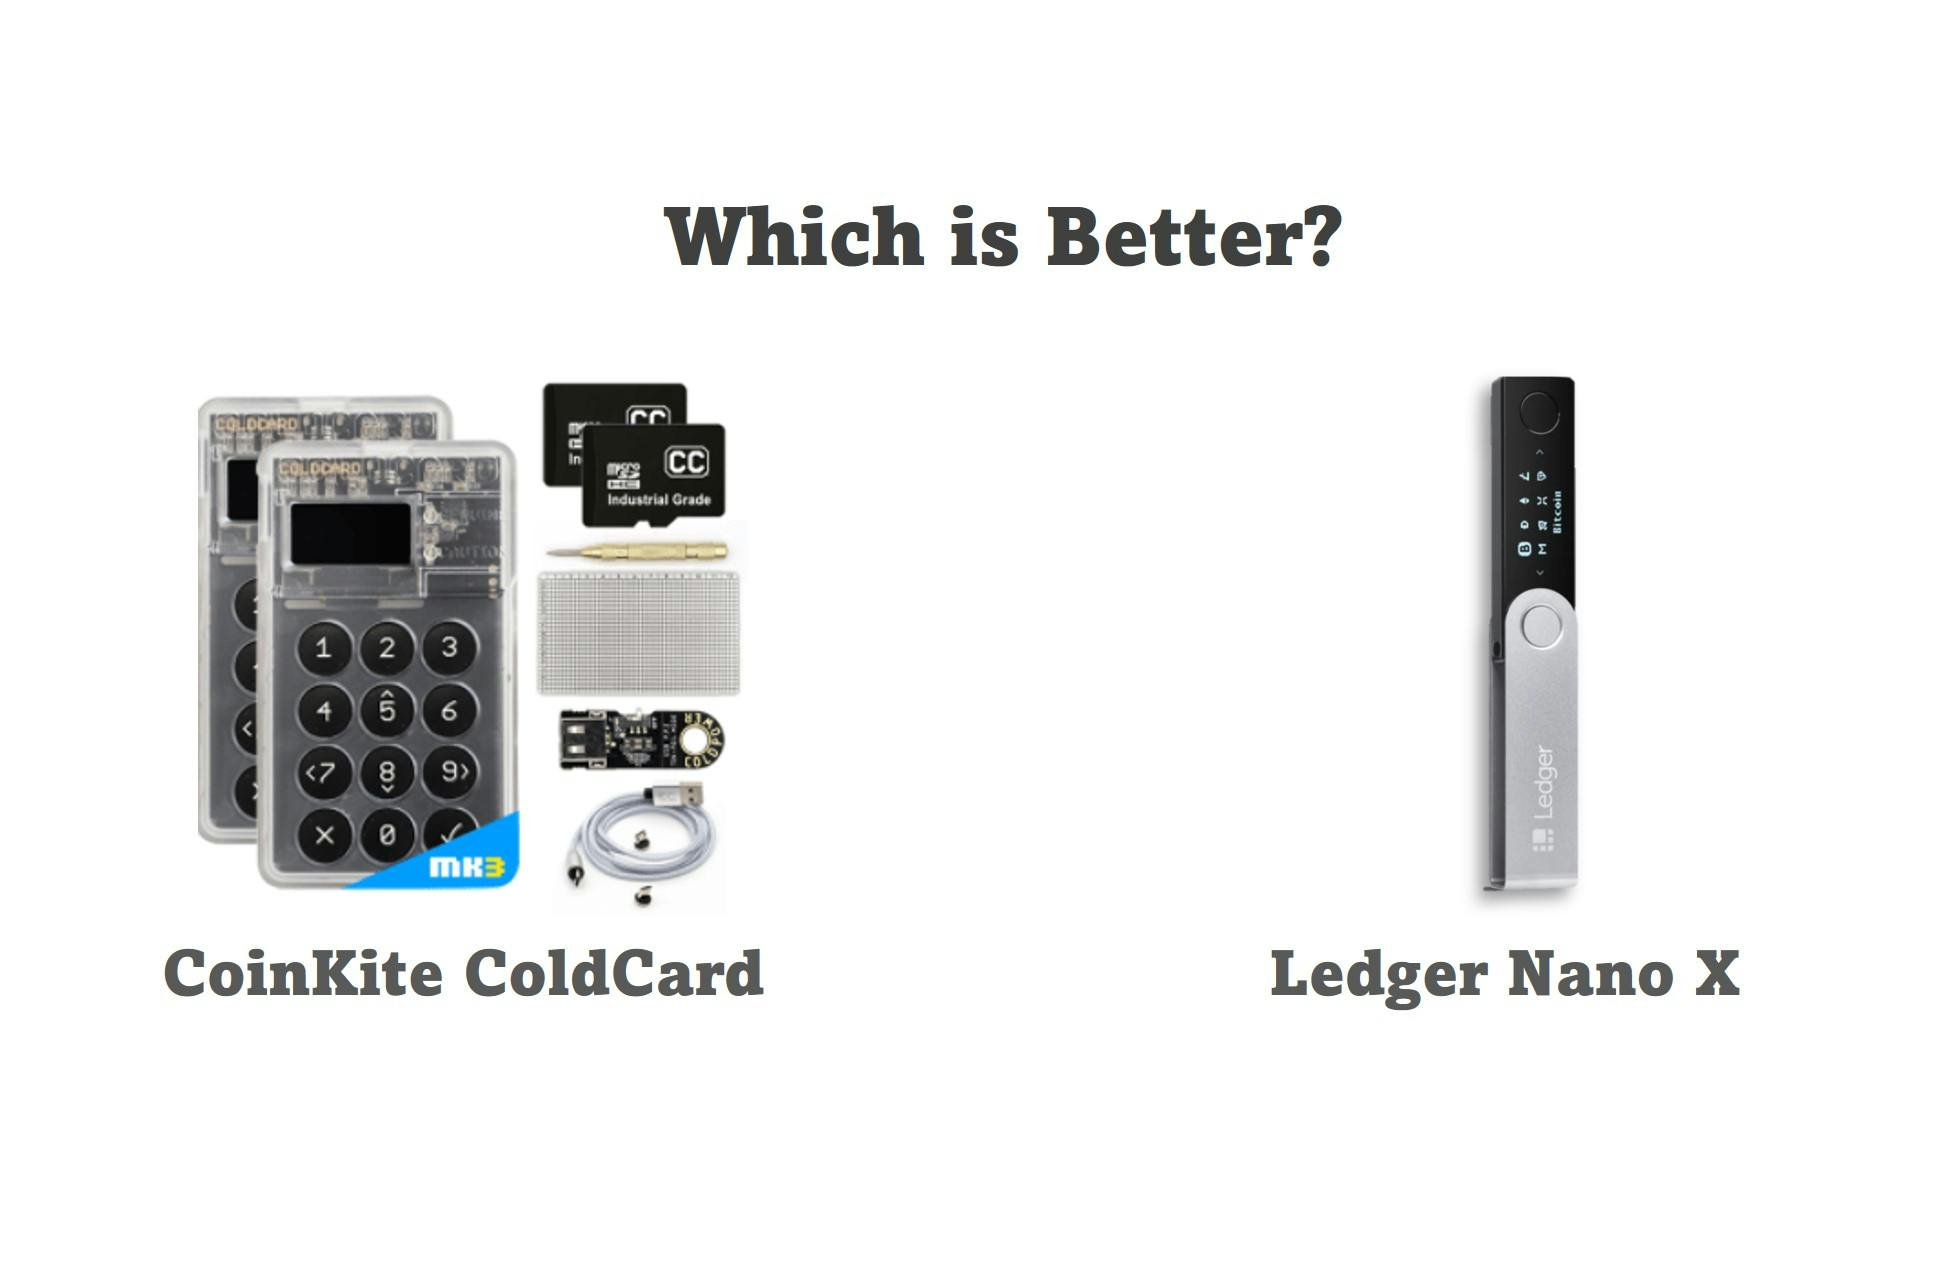 Coinkite Cold Hard Wallet Vs Ledger Nano X – Which is Better?